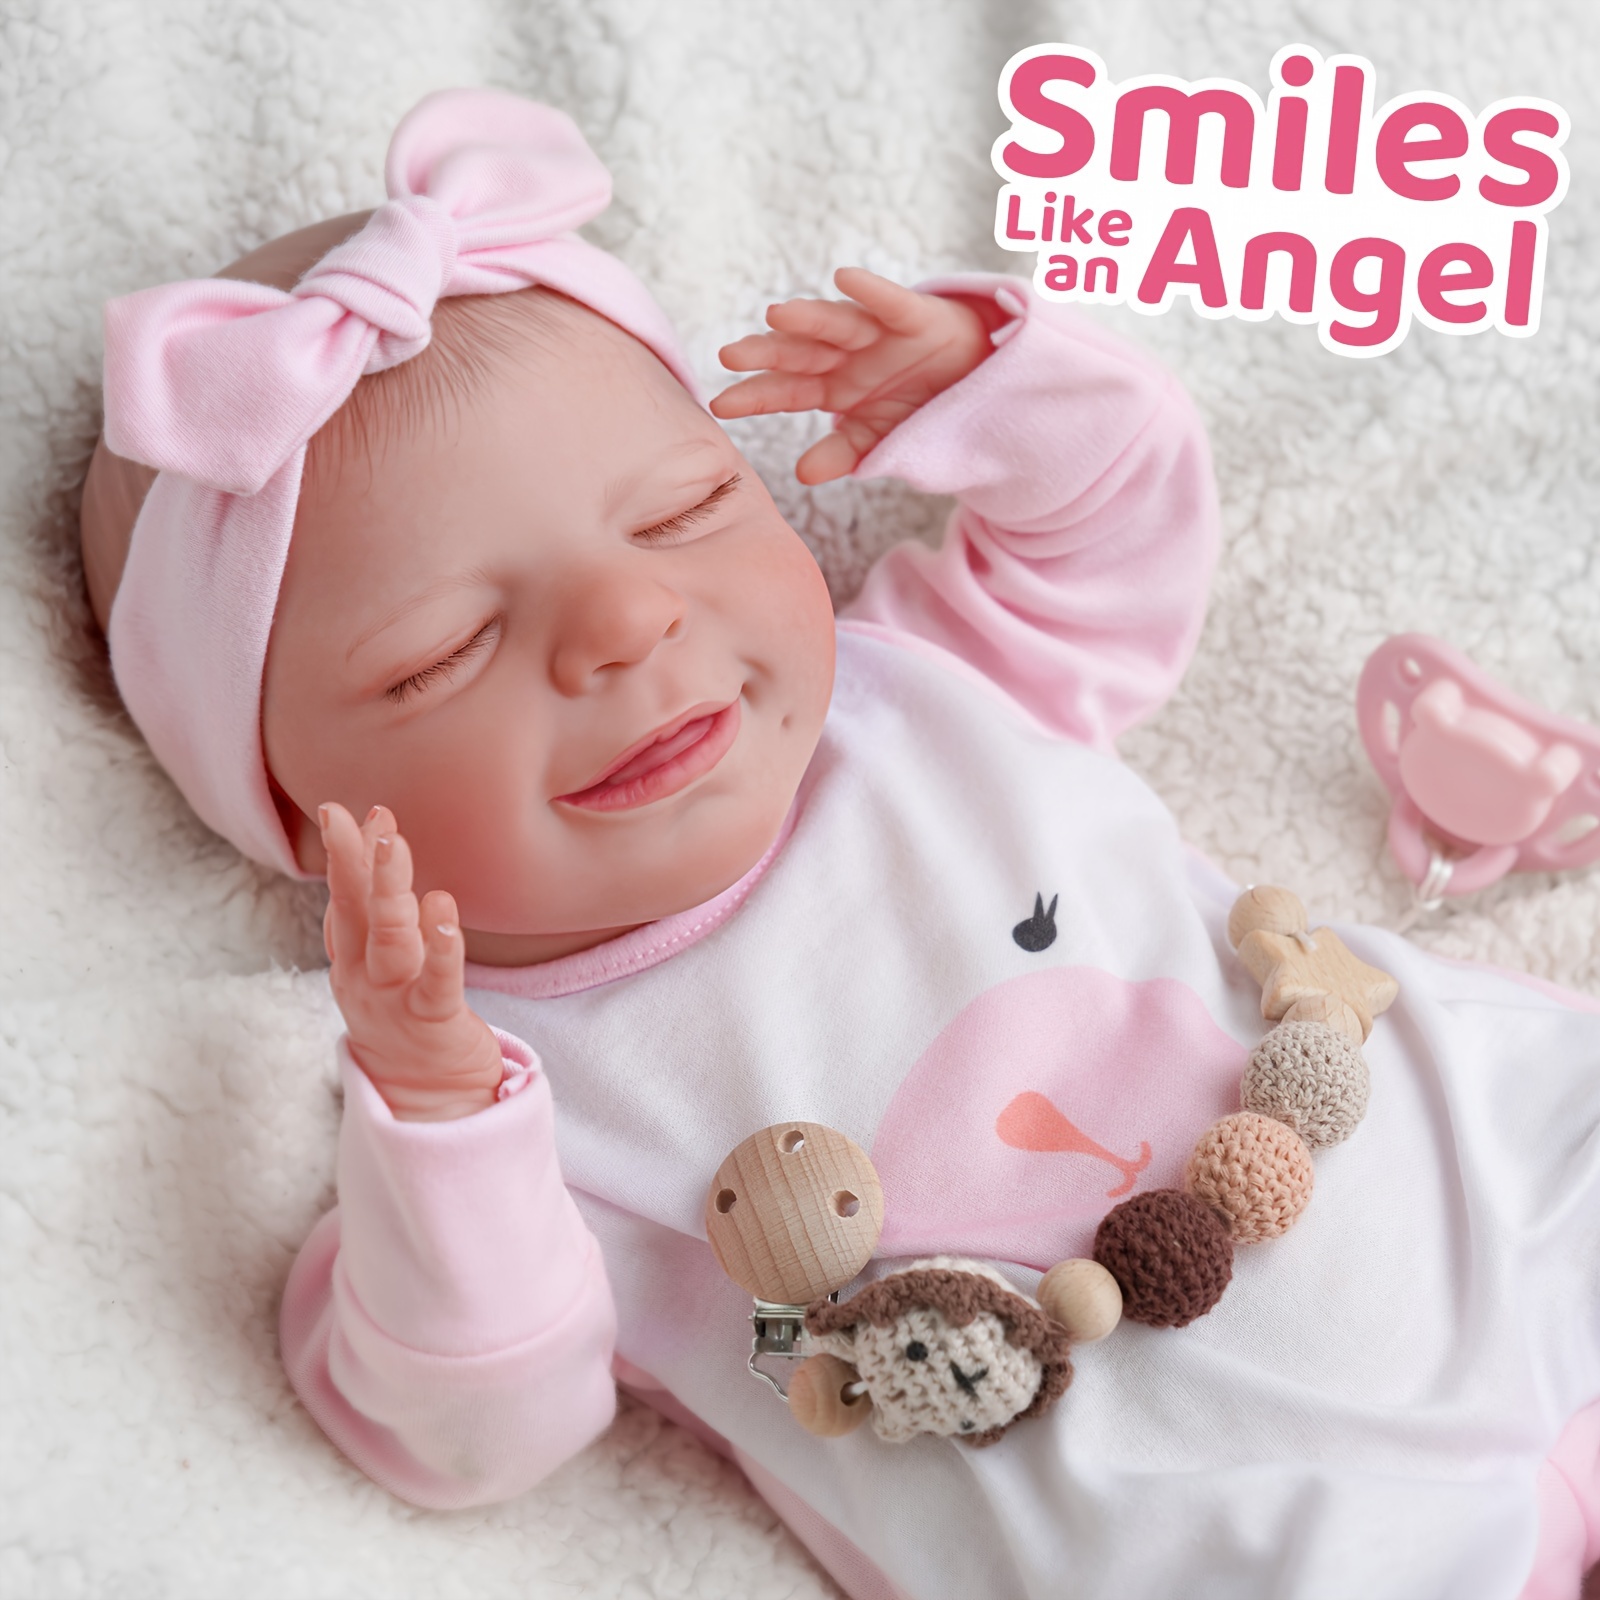 RSG Lifelike Reborn Baby Dolls - 20Inch-Real Baby Feeling Realistic-Newborn Baby  Dolls Adorable Smiling Real Life Baby Dolls with Gift Box for Kids Age 3+ 